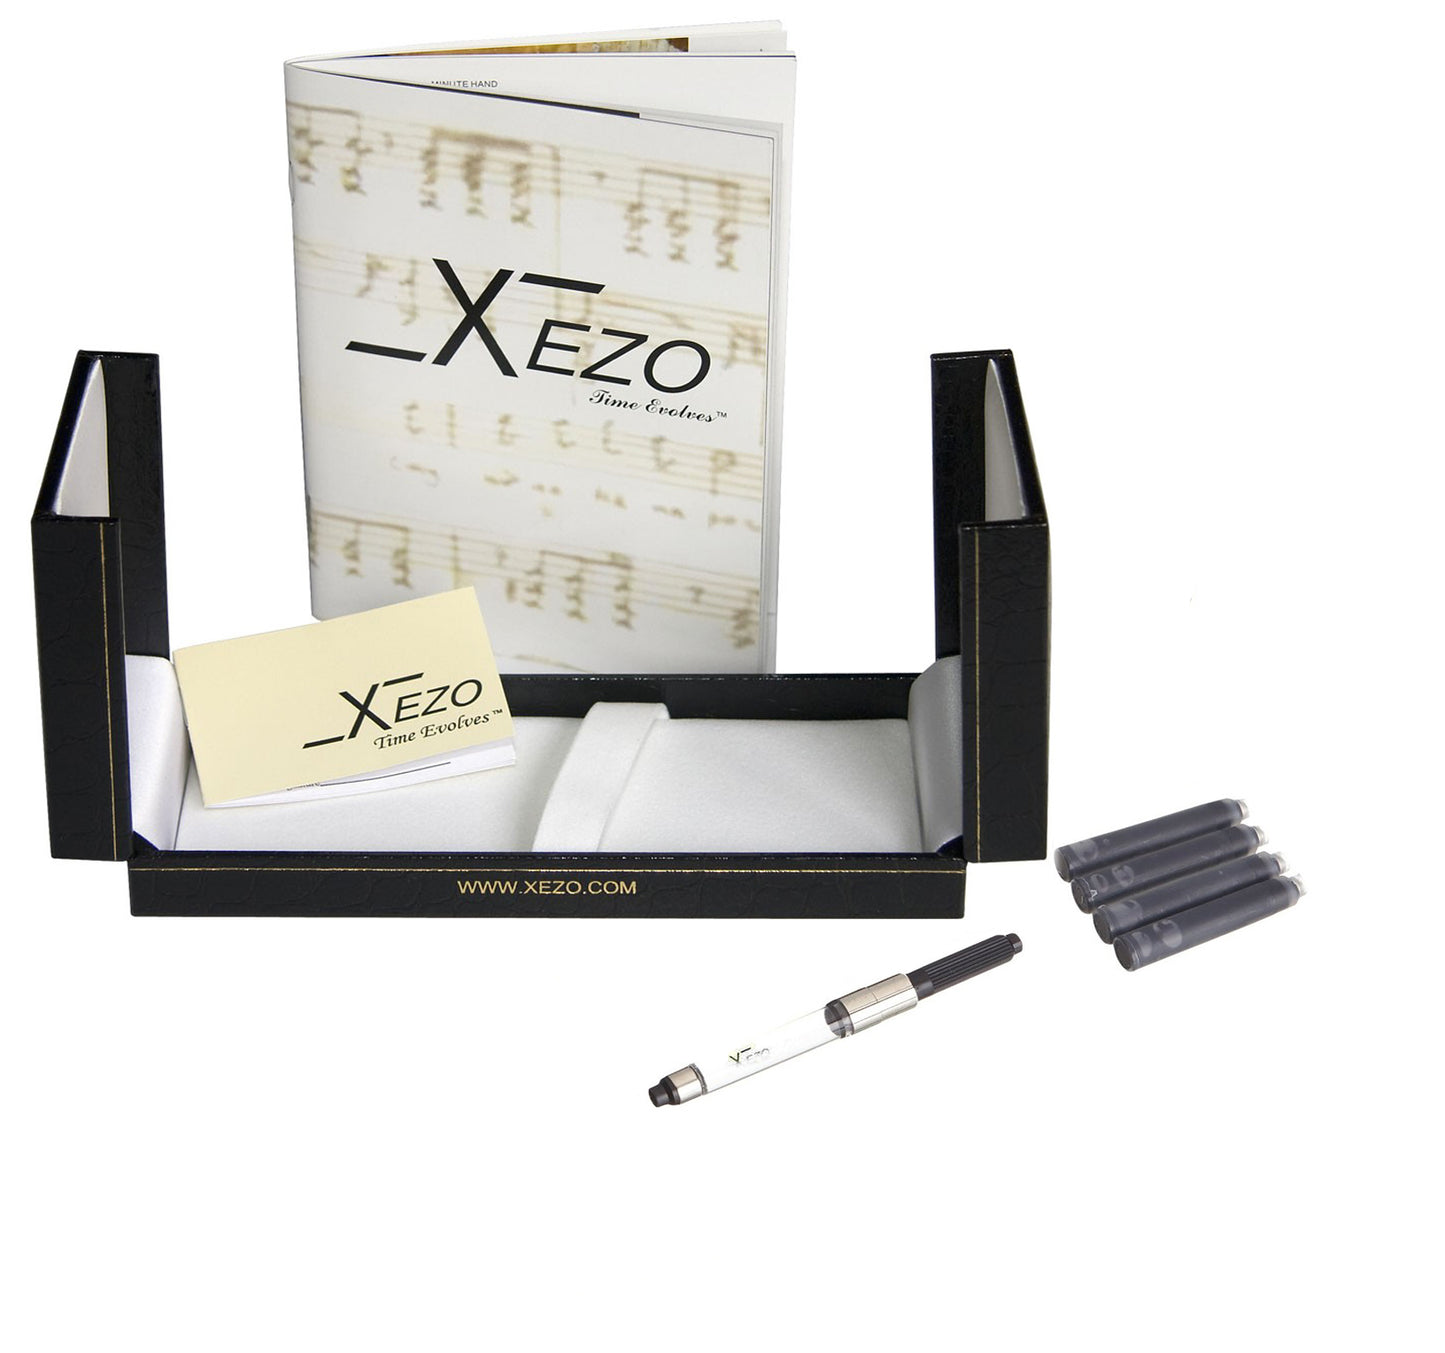 Xezo - Black gift box, certificate, manual, chrome-plated ink converter, and four ink cartridges of the Maestro 925 BL MOP FG fountain pen